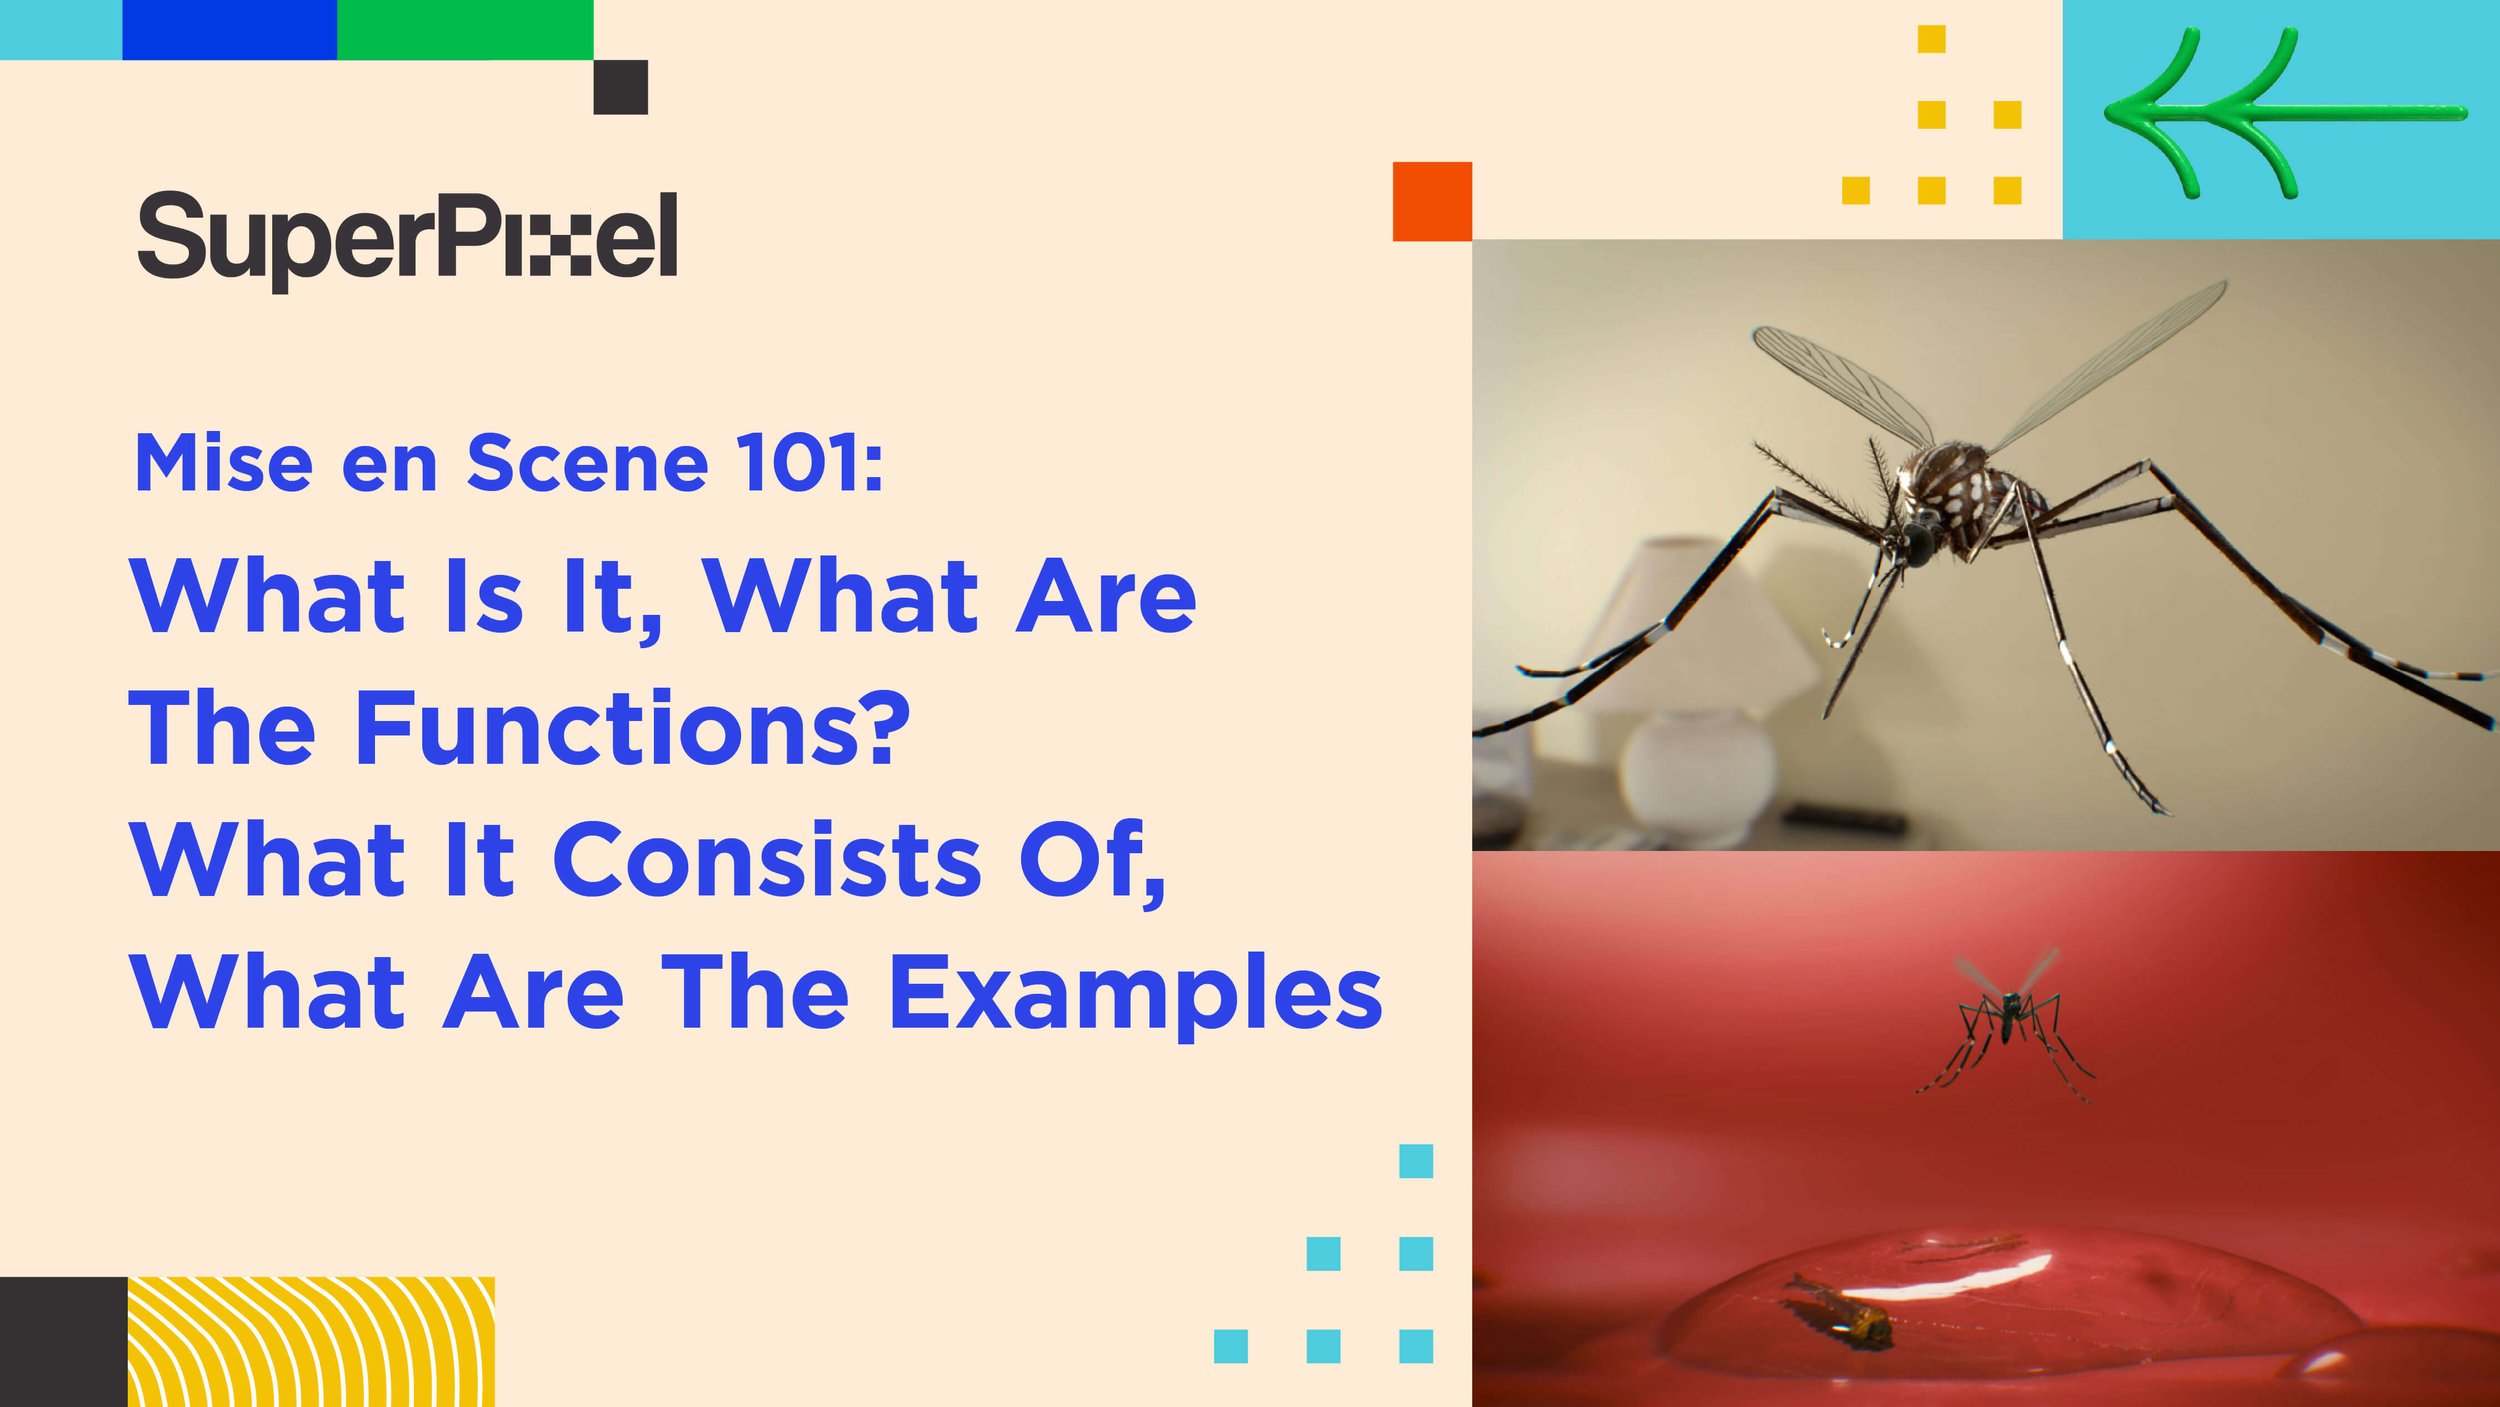 Mise en Scene 101: What Is It, The Elements, and Examples